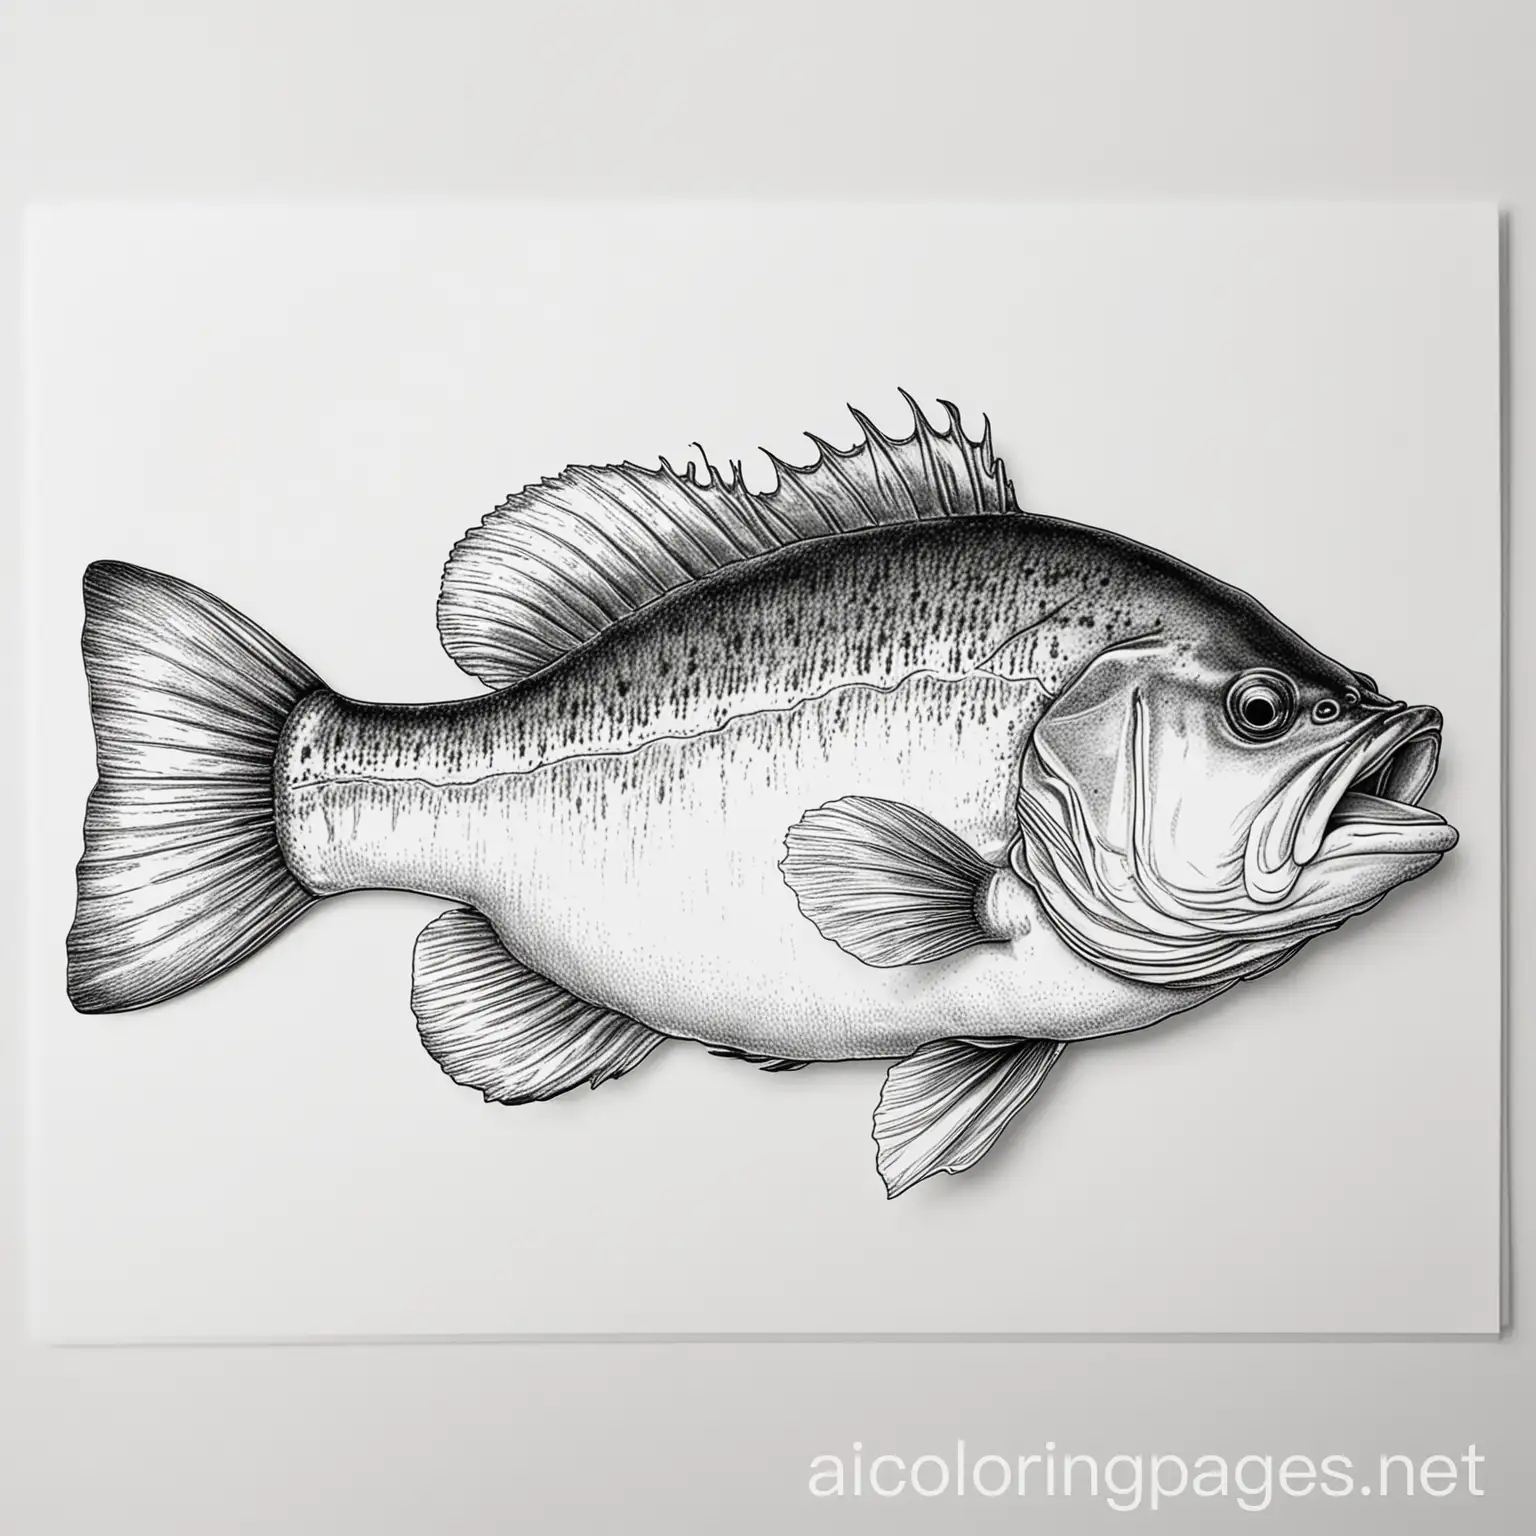 small mouth bass, Coloring Page, black and white, line art, white background, Simplicity, Ample White Space. The background of the coloring page is plain white to make it easy for young children to color within the lines. The outlines of all the subjects are easy to distinguish, making it simple for kids to color without too much difficulty